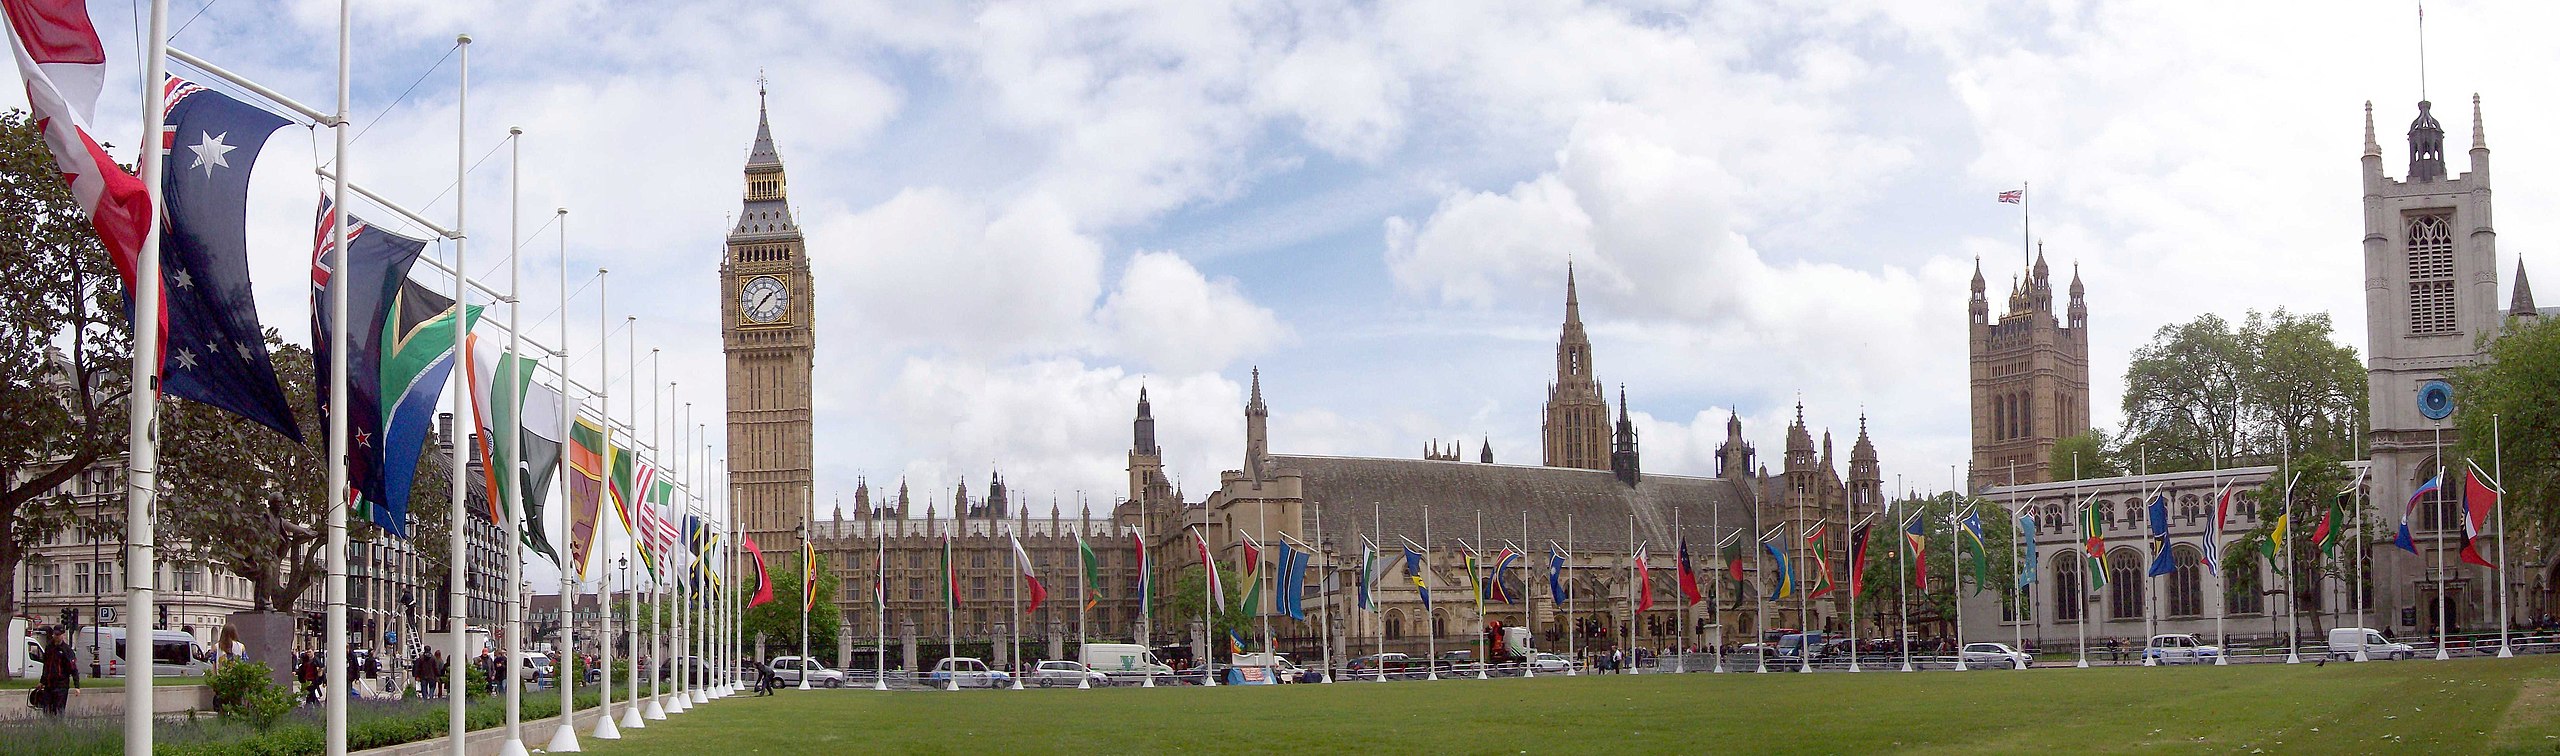 A shot of Parliament square showing the House of Parliament